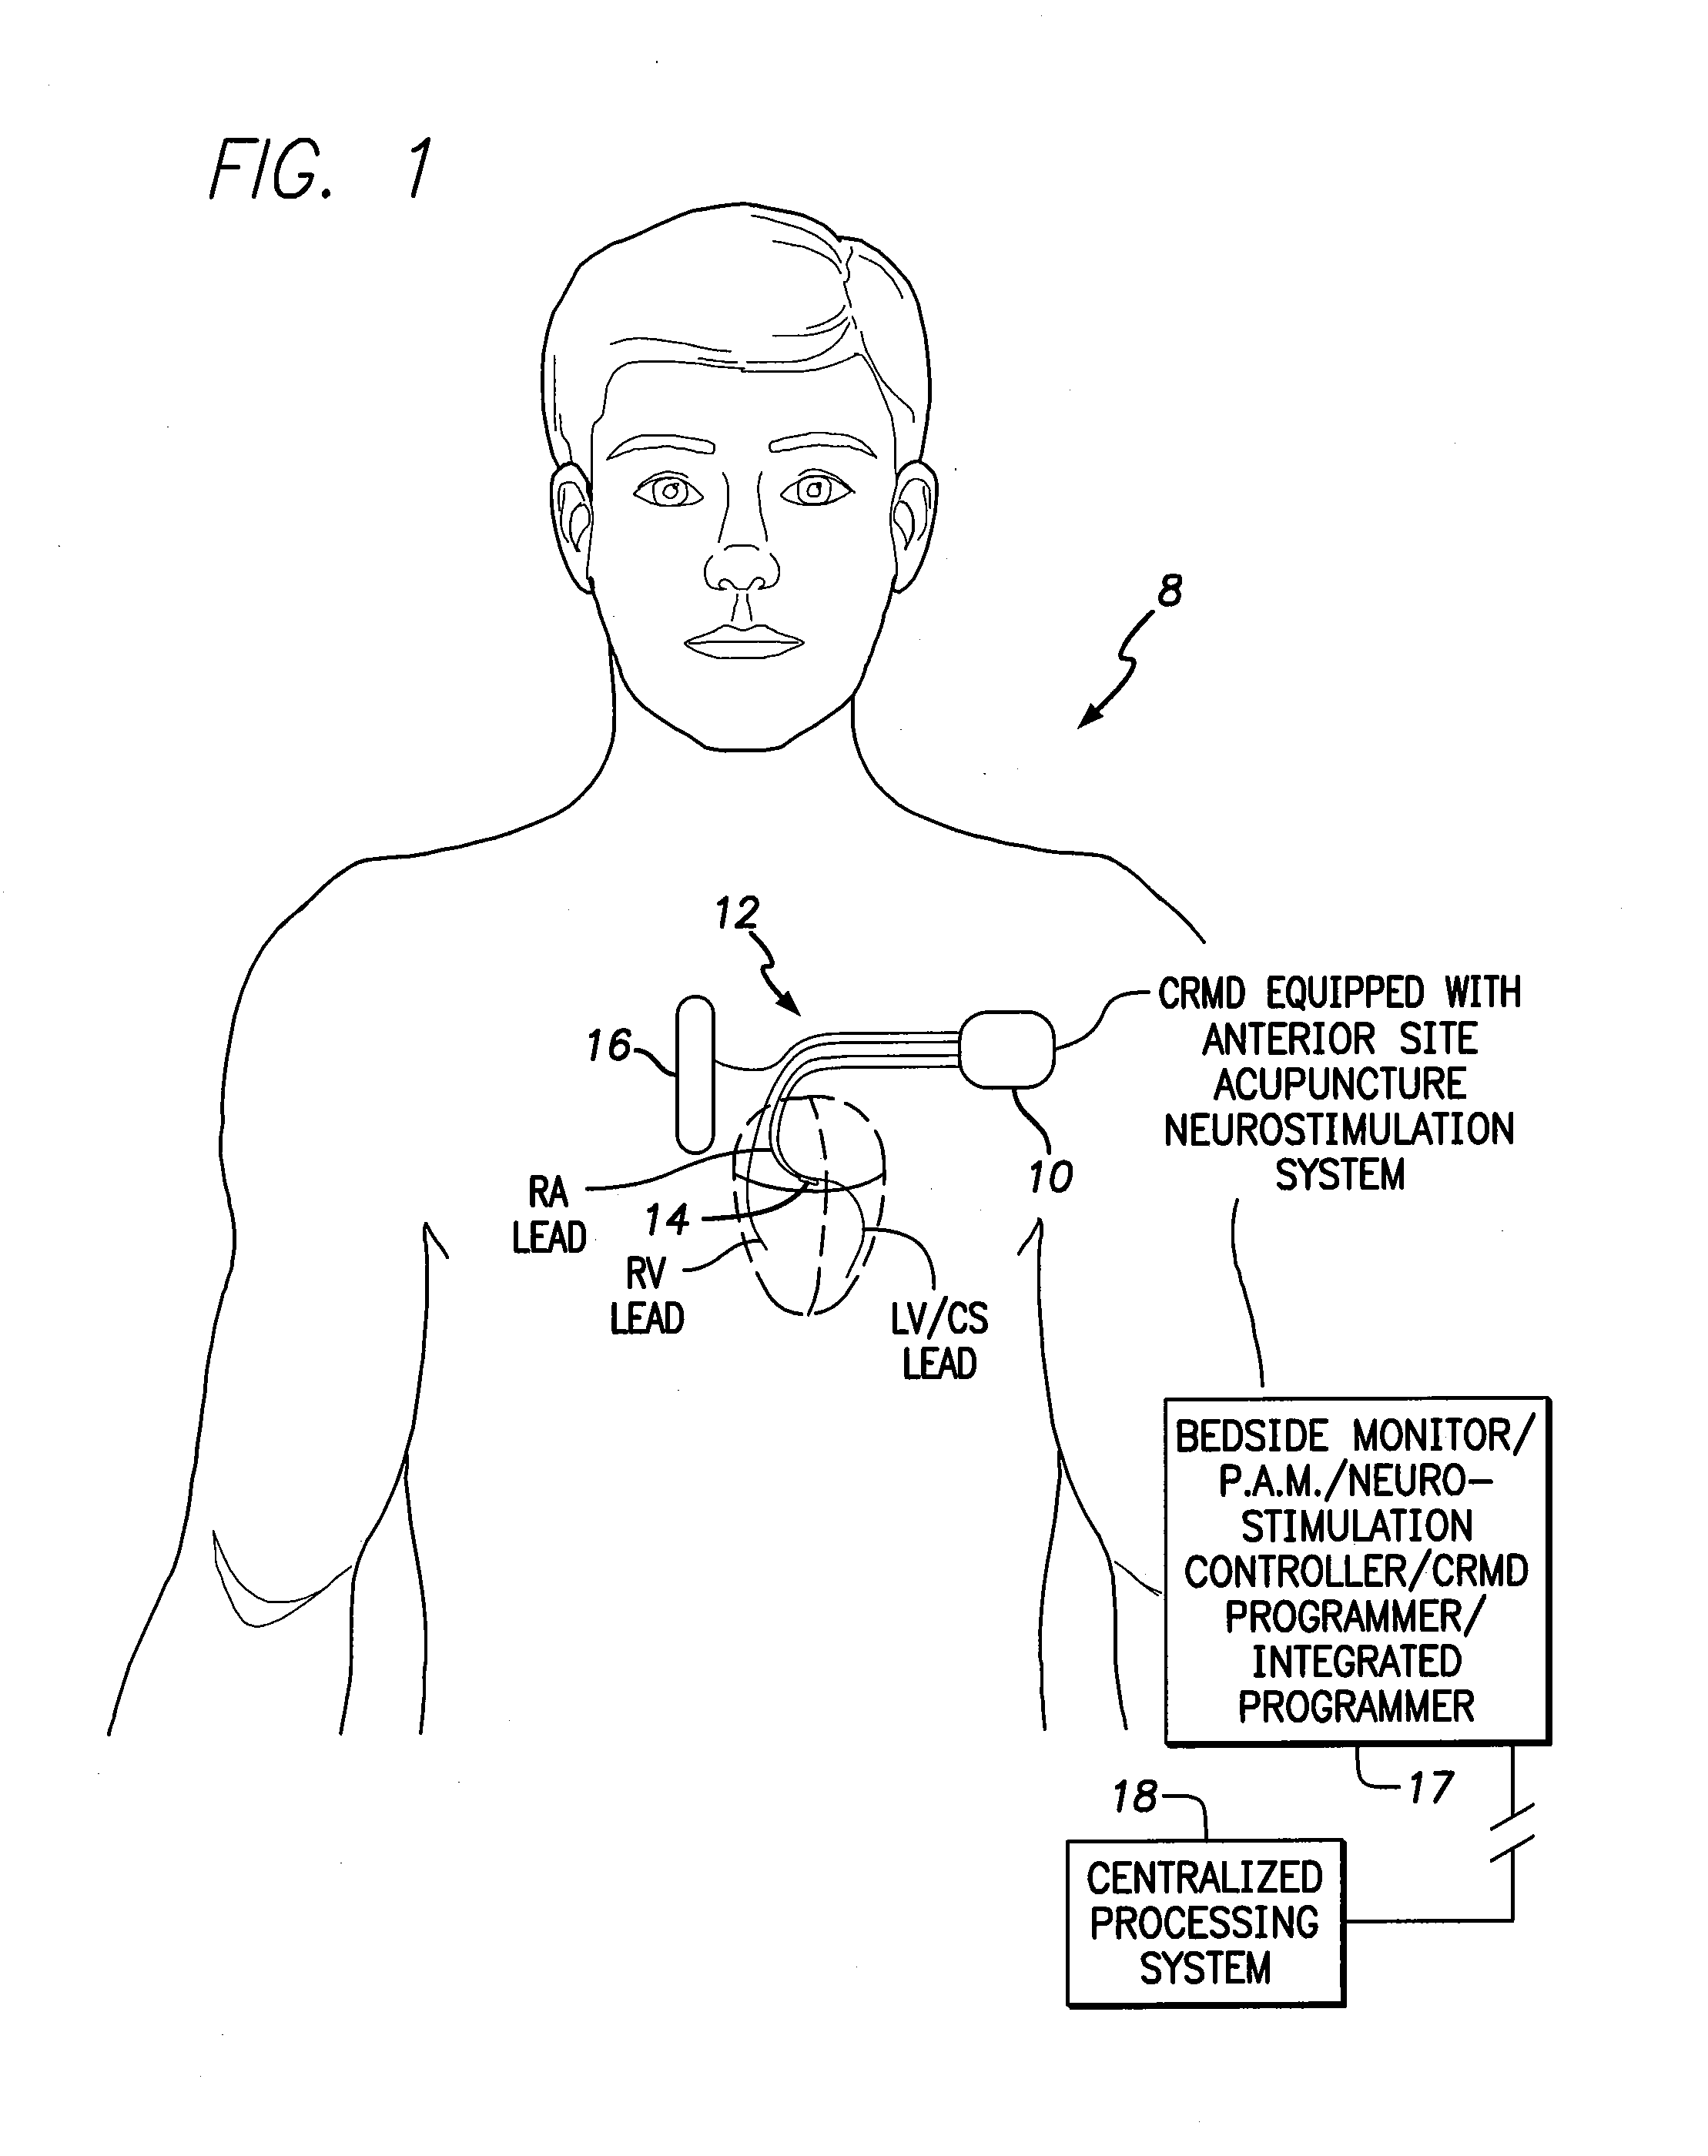 Systems and methods for controlling neurostimulation of acupuncture sites using an implantable cardiac rhythm management device